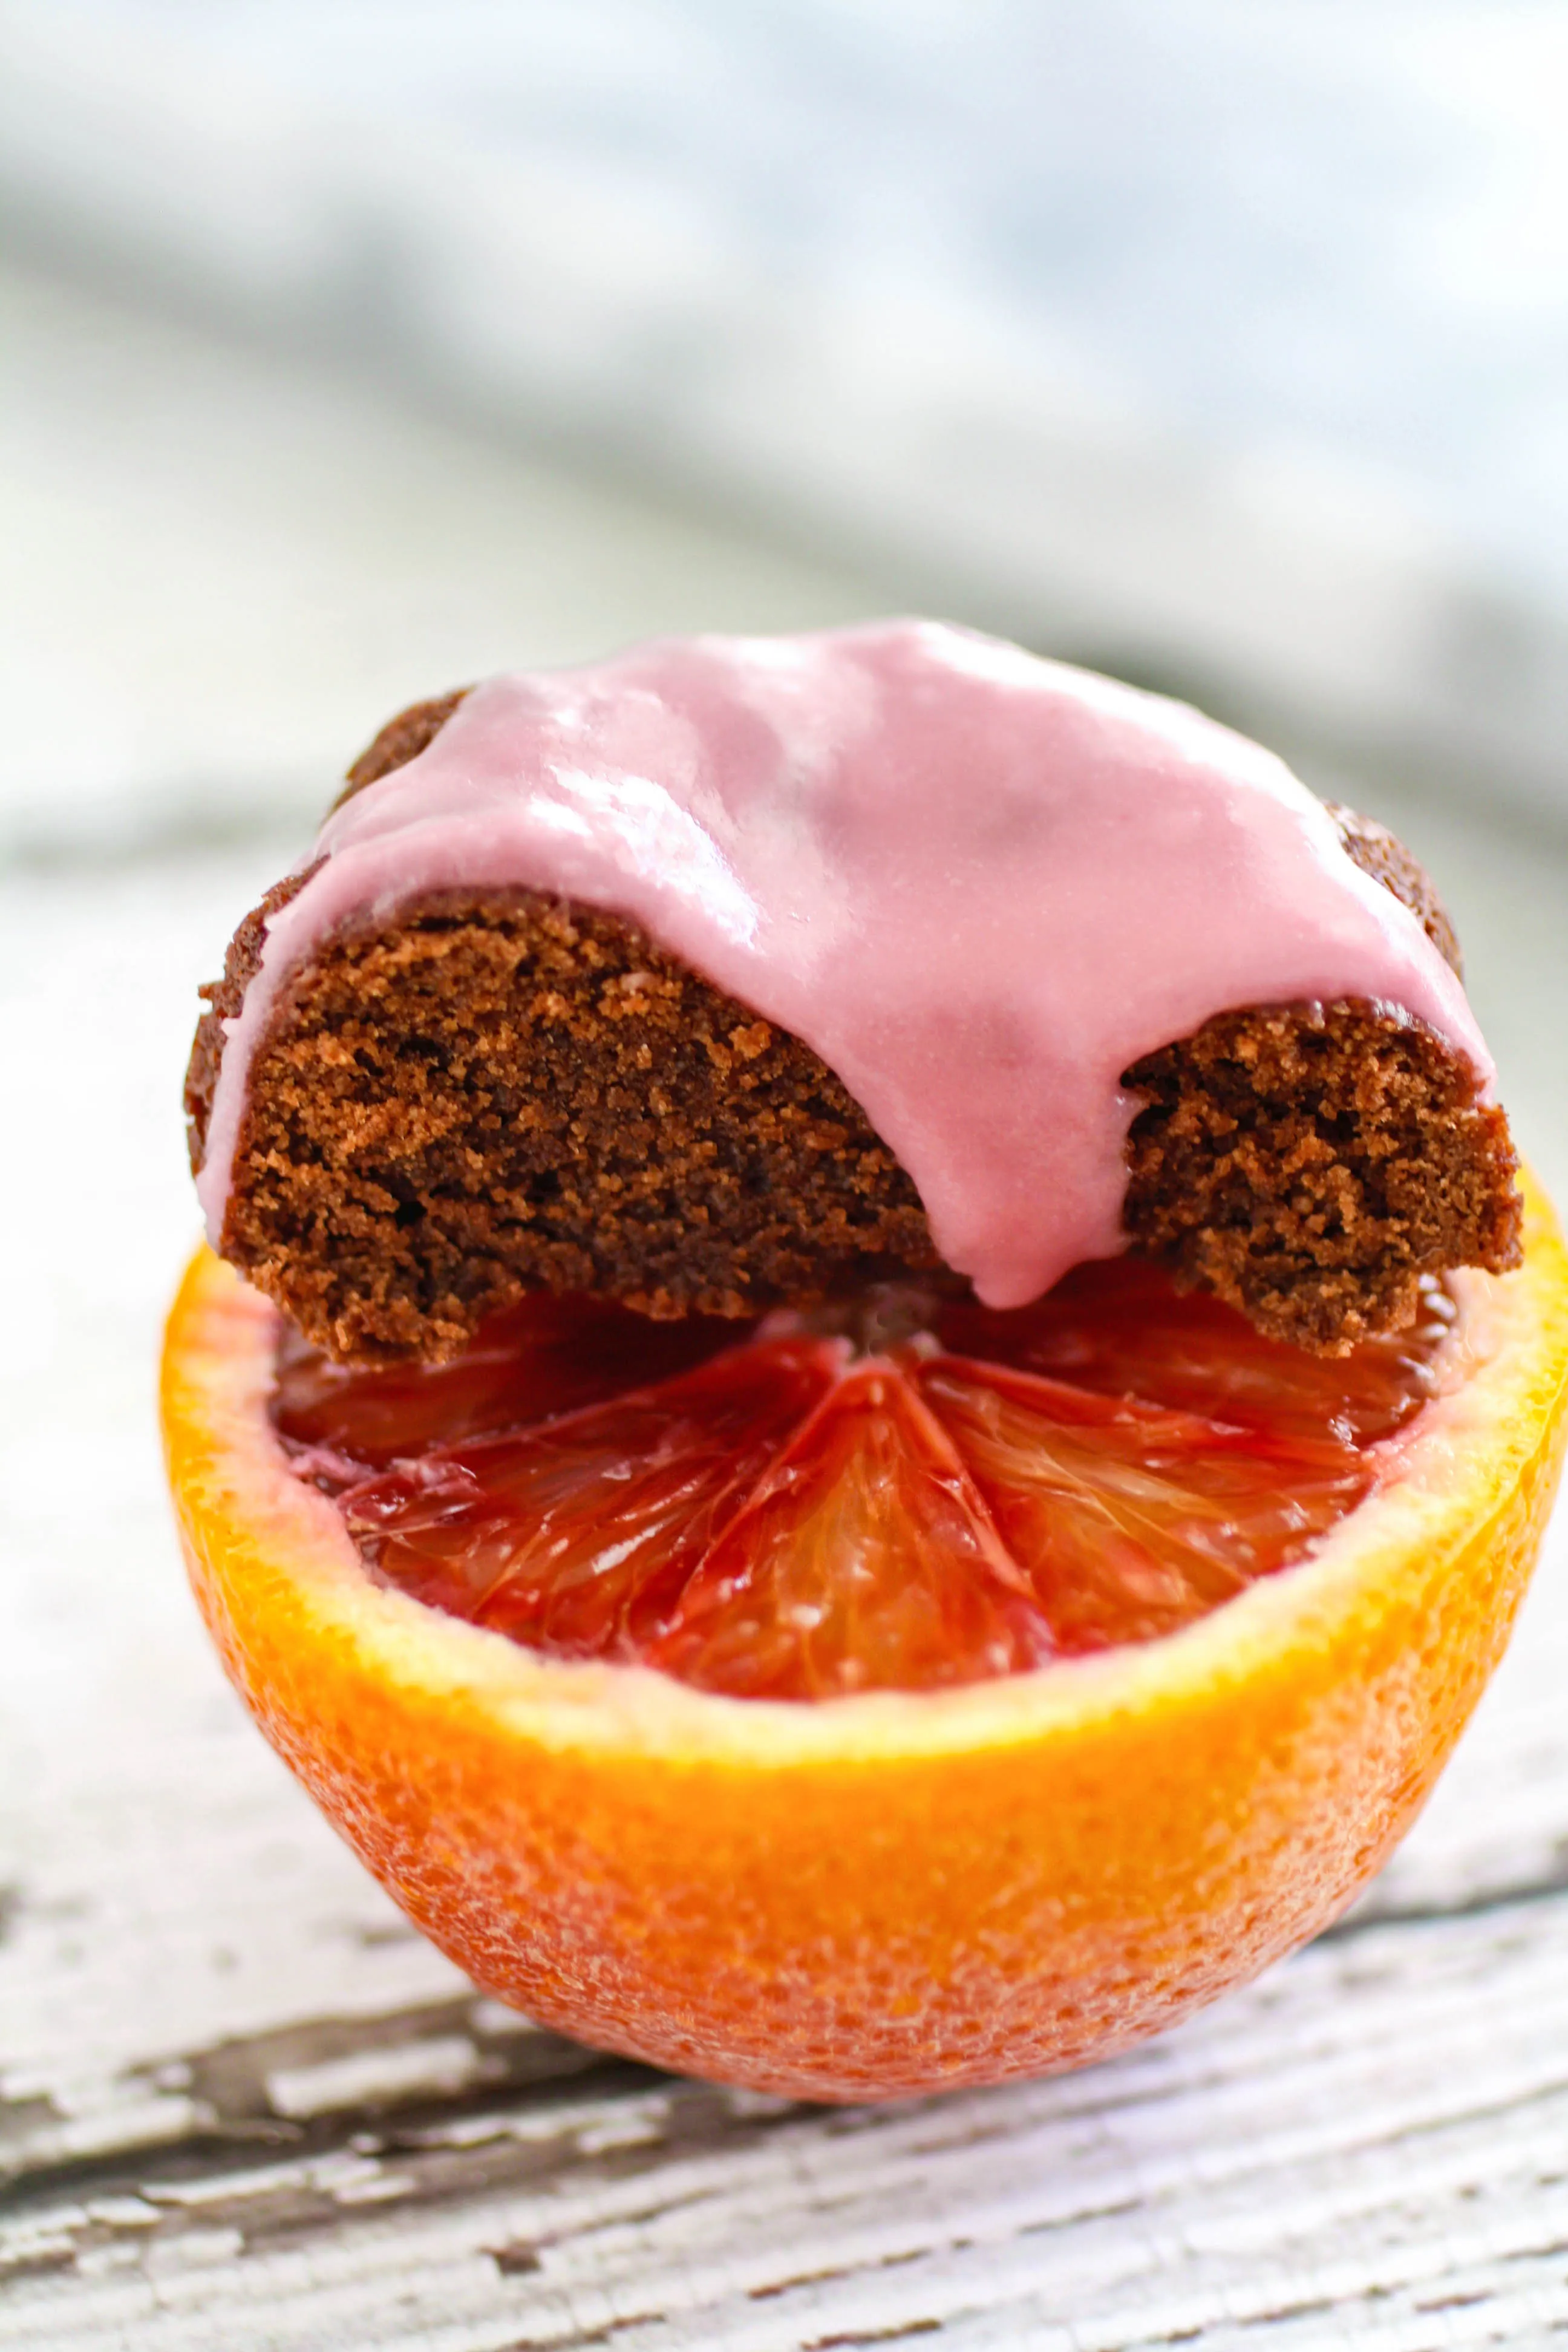 Mini Blood Orange Scented Chocolate-Ricotta Cakes make a lovely dessert! The blood orange flavor in these mini cakes is amazing!